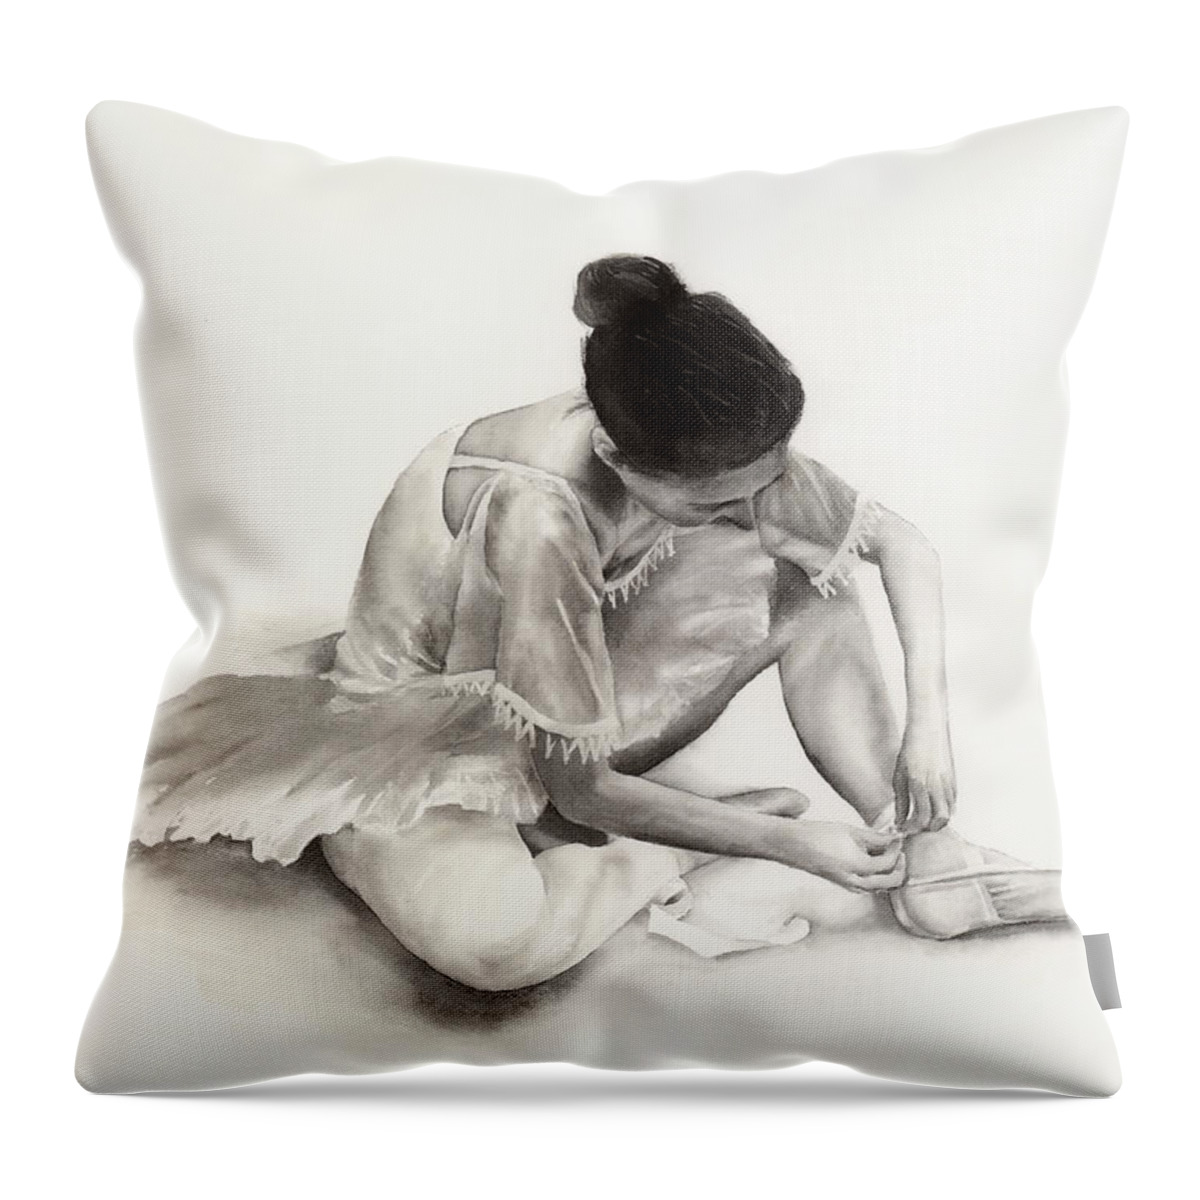 Dancer Throw Pillow featuring the painting The Ballet Dancer by Hailey E Herrera